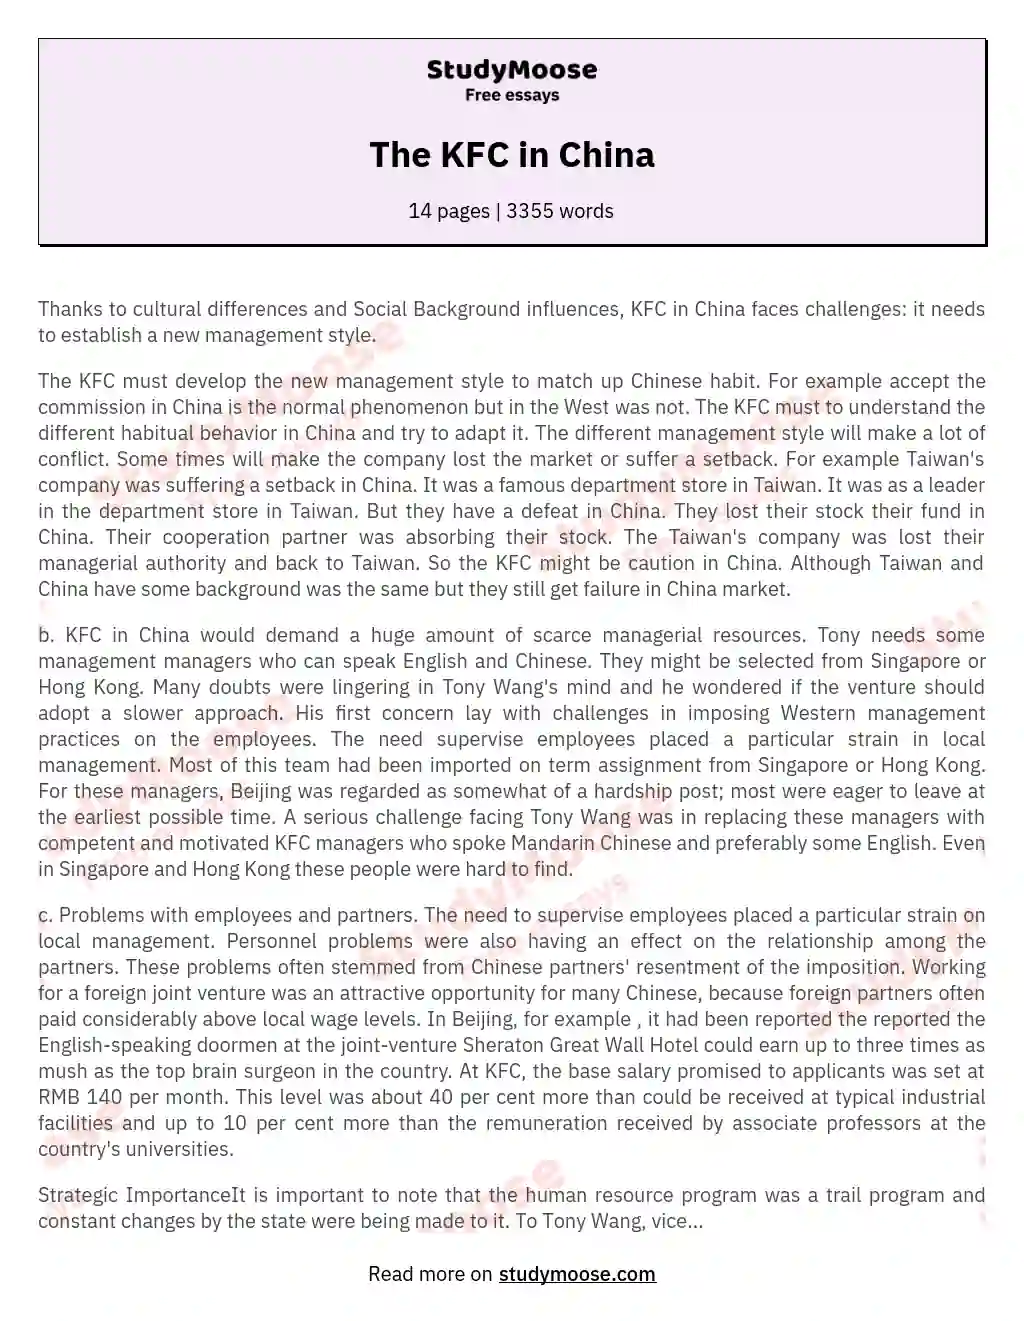 kfc in china case study solution